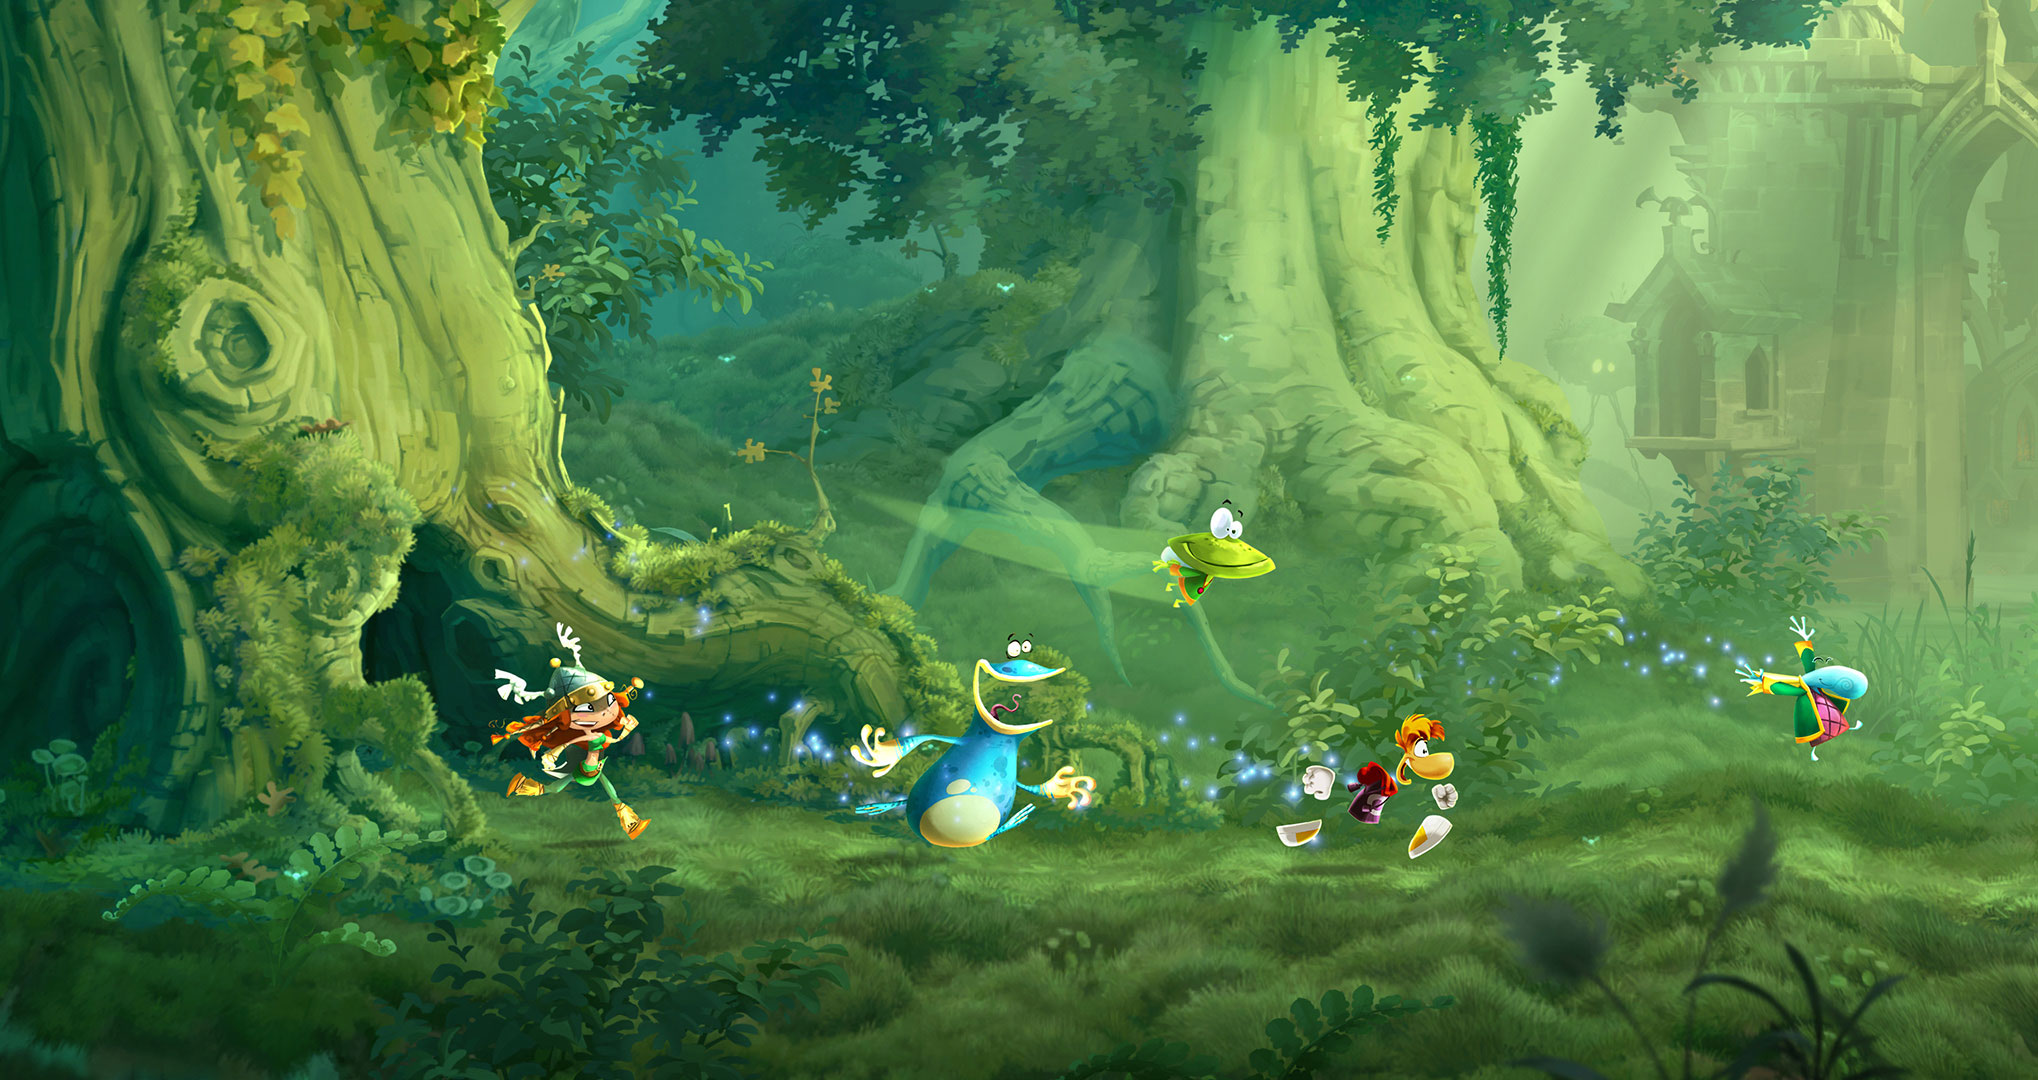 download rayman for nintendo switch